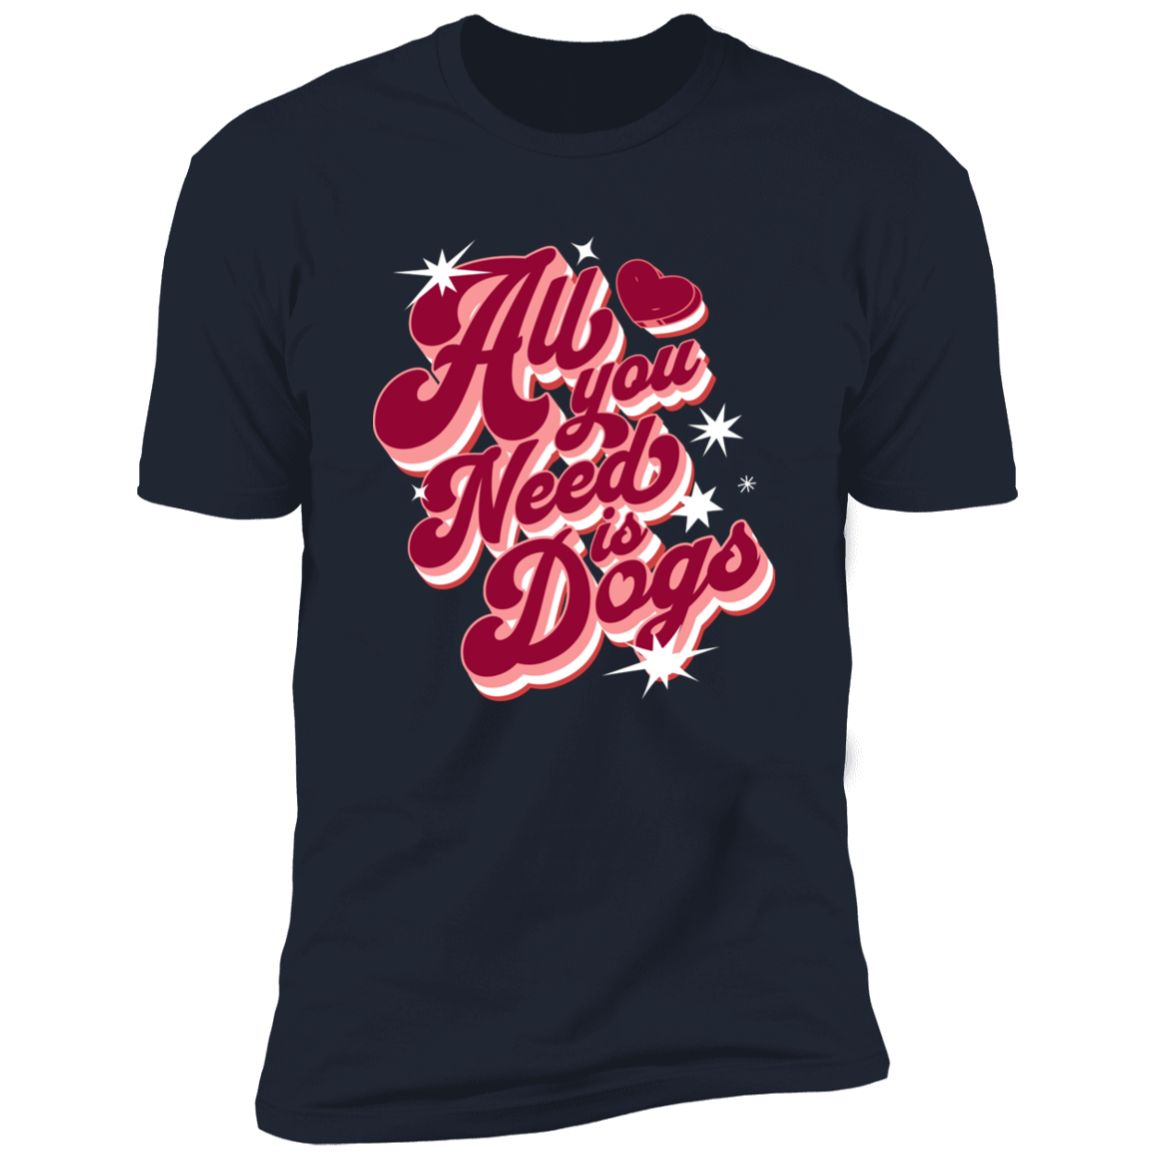 All I Need is Dogs T-shirt, Dog Shirt for humans, in navy blue